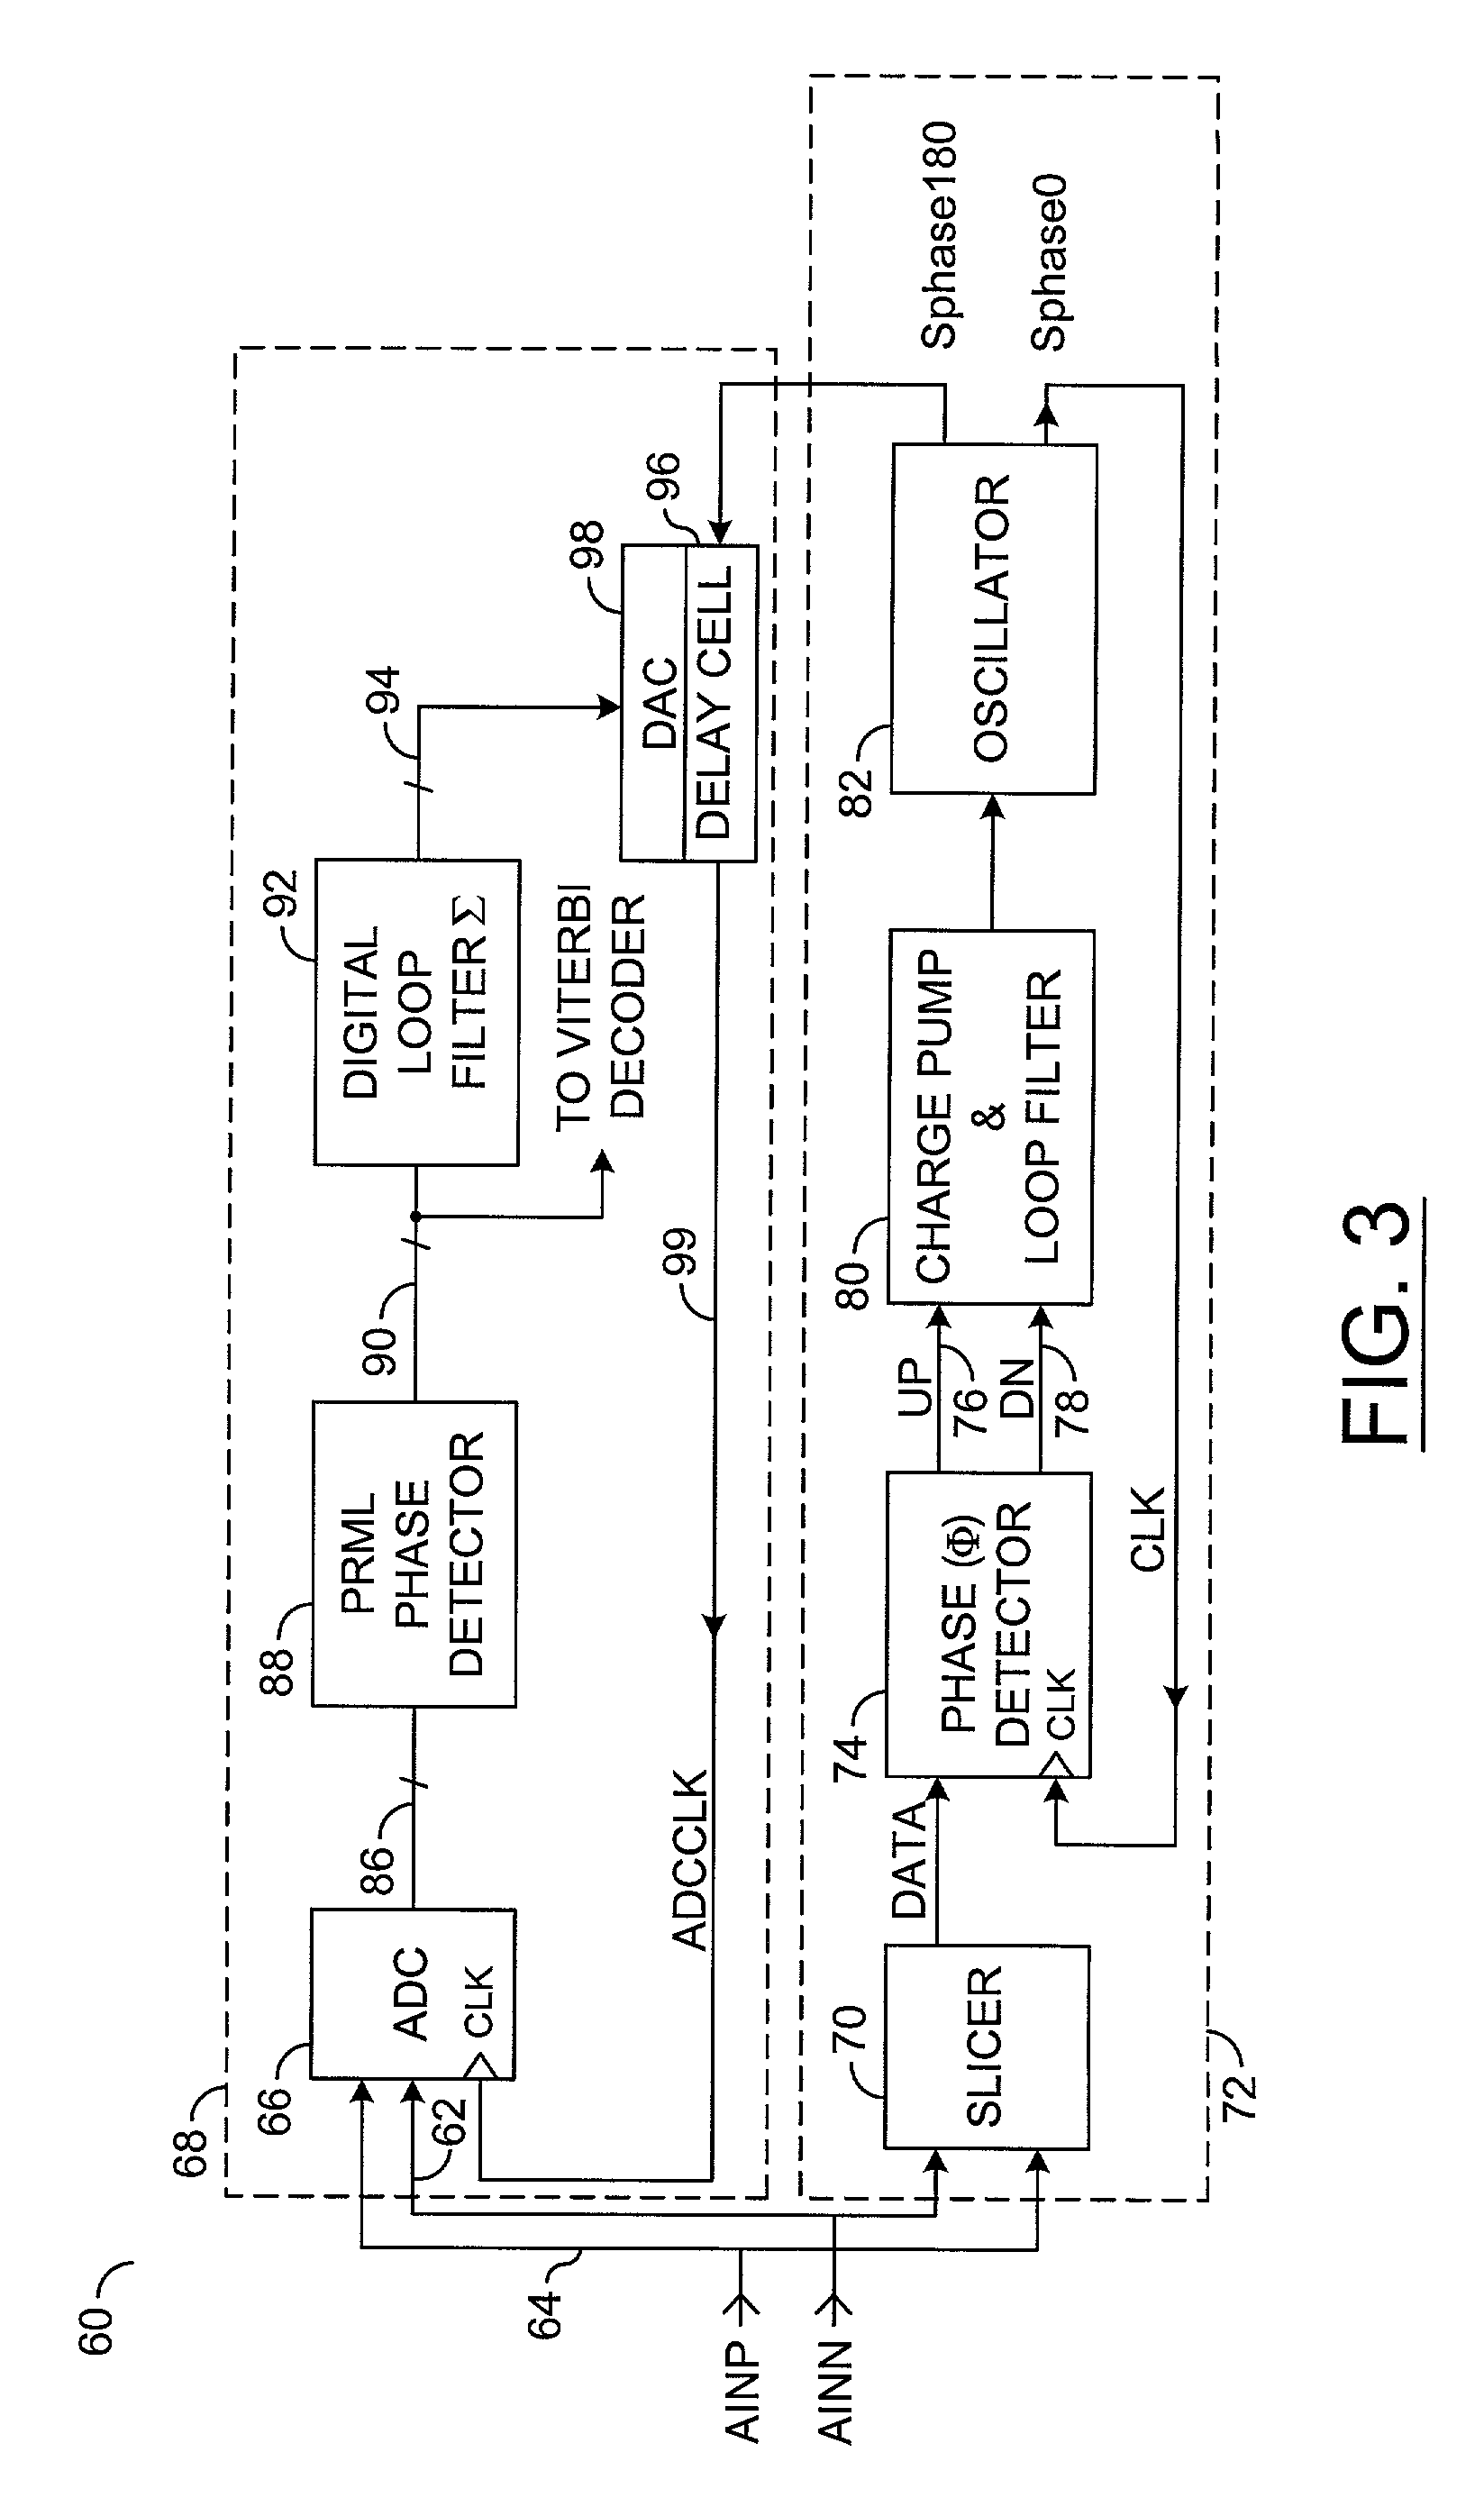 Apparatus and method for acquiring phase lock timing recovery in a partial response maximum likelihood (PRML) channel